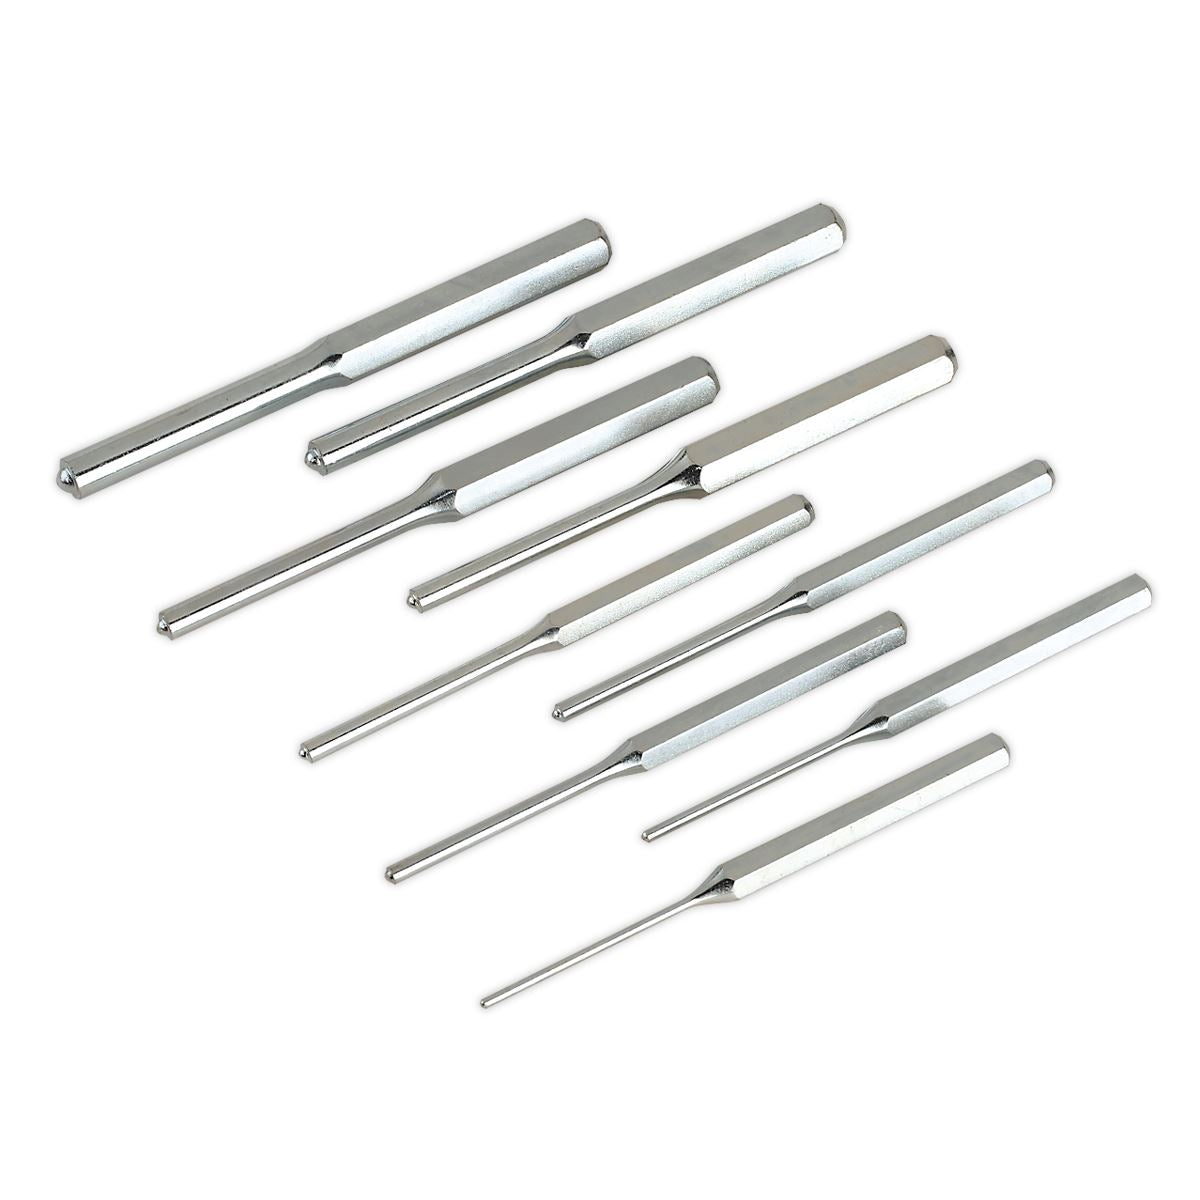 Sealey Premier Roll Pin Punch Set 9pc 3-12mm Metric